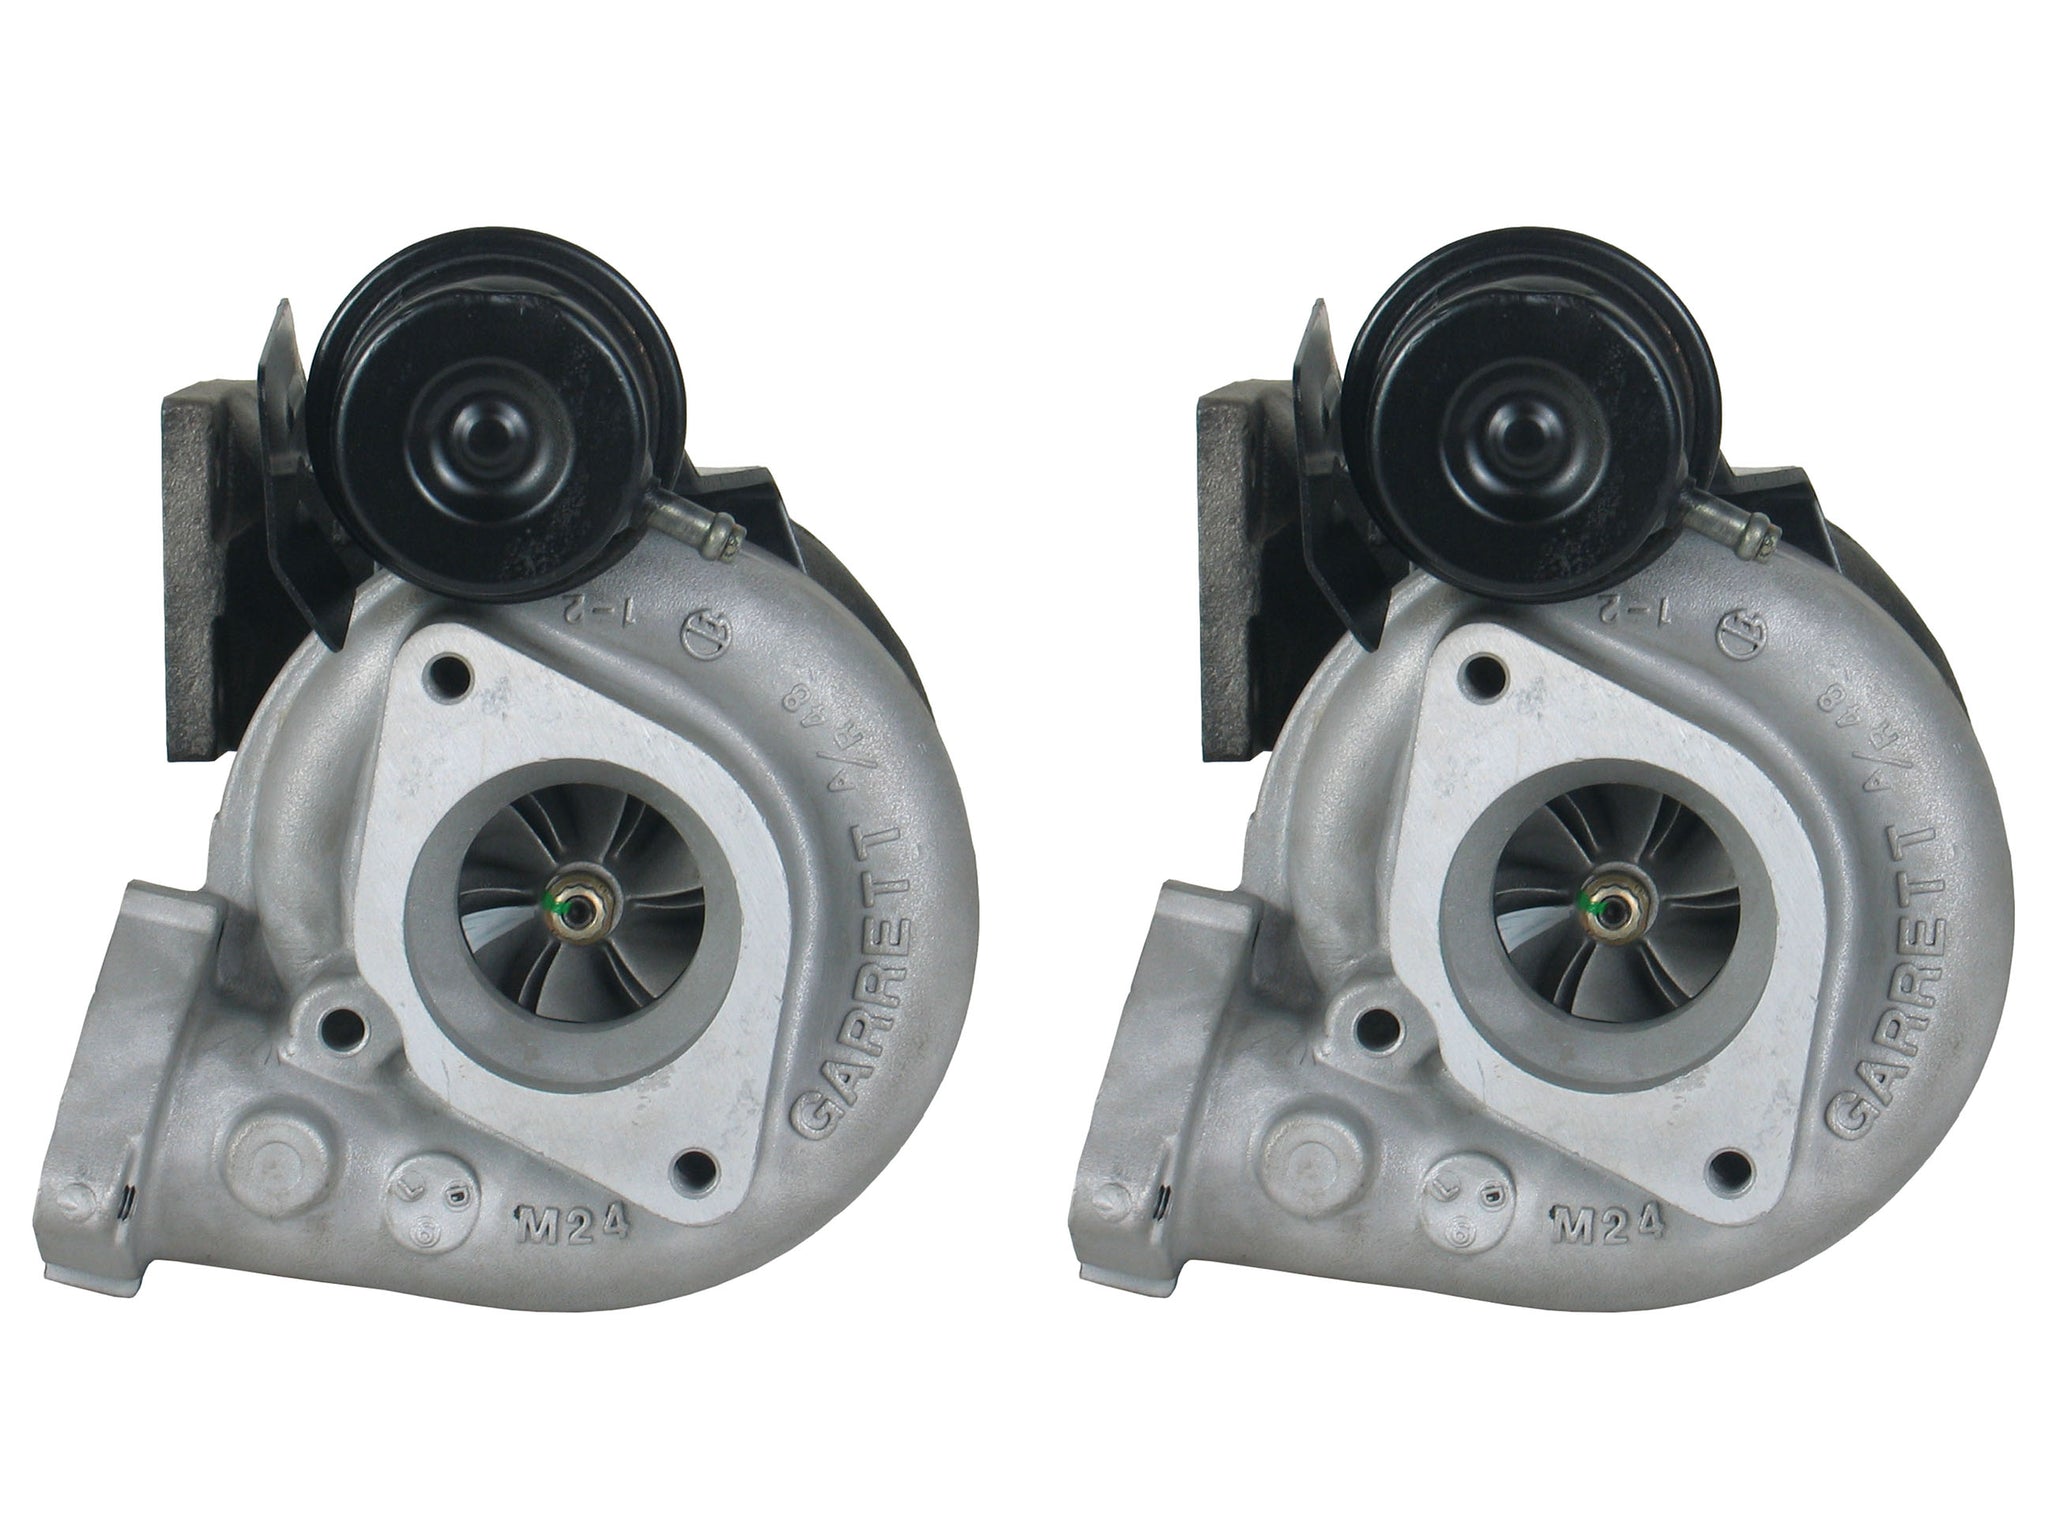 Pair TB2206 Turbocharger for Nissan 300ZX V6 466081-0001 Turbo